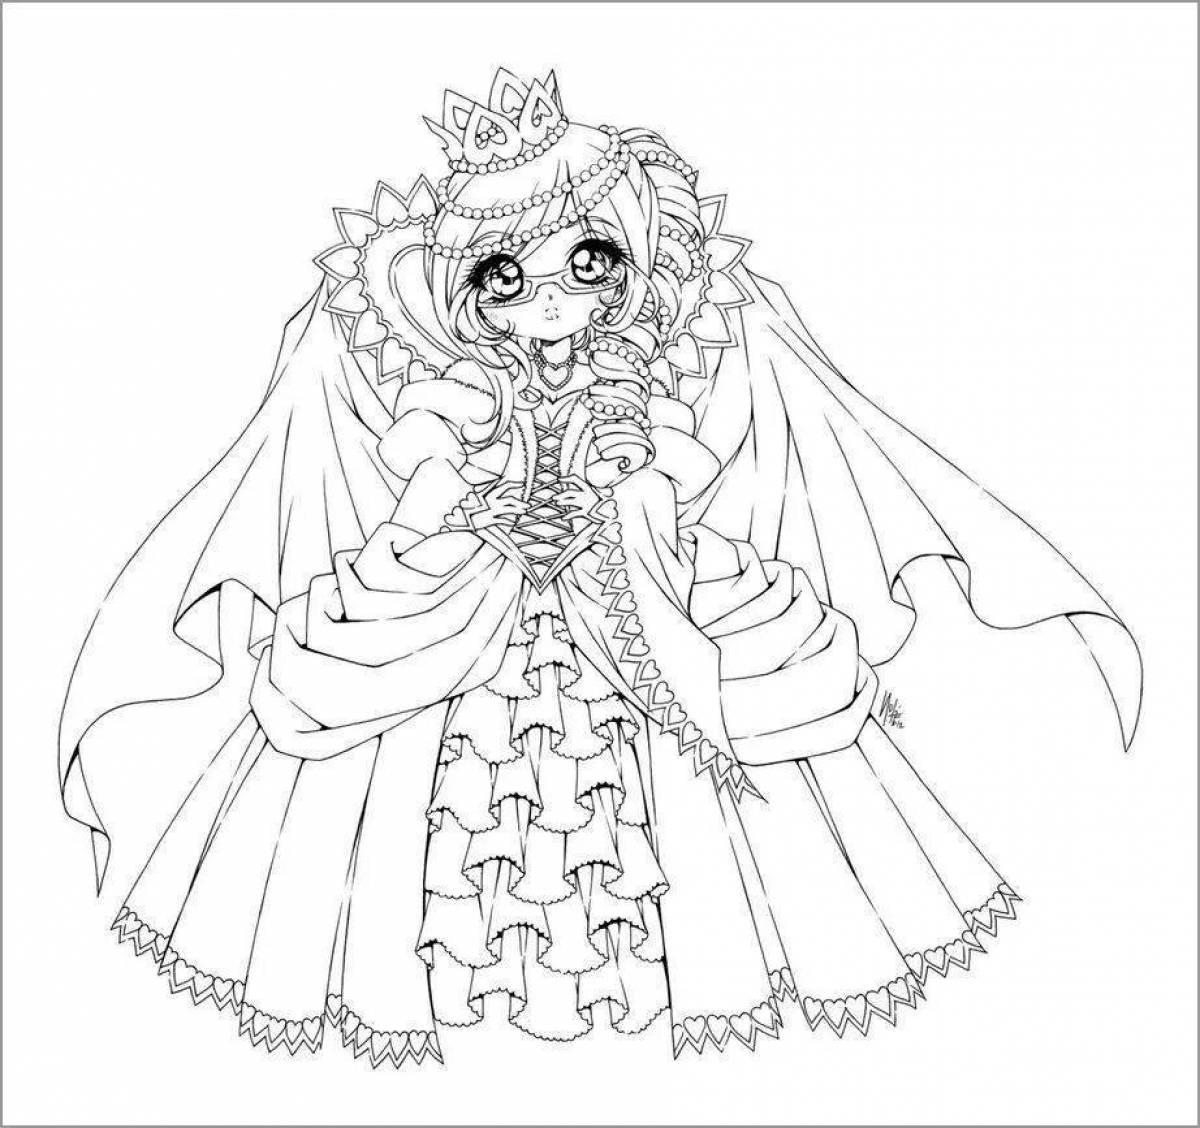 Awesome anime princess coloring book